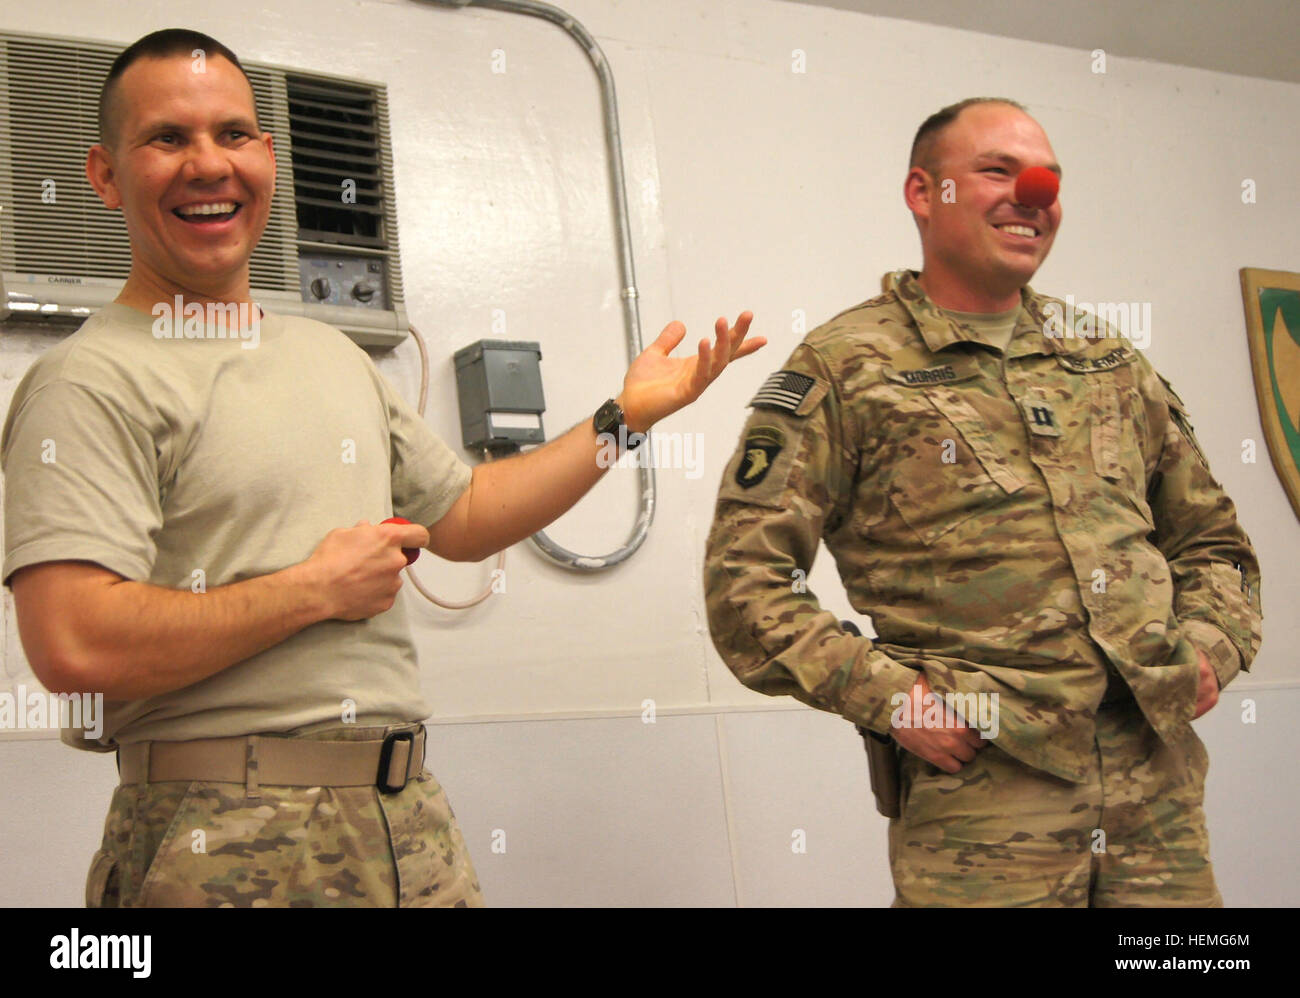 U.S. Army Capt. John Morris plays along with a joke by Maj. Bruce Townley, a native of Chamois, Mo., at Forward Operating Base Lightning March 31, 2013. Morris and Townley are advisers to the Afghan National Army's 203rd 'Thunder' Corps in the Paktya province of Afghanistan. Townley, an alumnus of Ringling Brothers and Barnum & Bailey Clown College, performed an Easter Sunday magic and juggling show for the soldiers of FOB Lightning. (U.S. Army photo by Spc. Ryan Scott, 129th Mobile Public Affairs Detachment/RELEASED) Army major clowns around at FOB Lightning 130331-A-HL120-002 Stock Photo